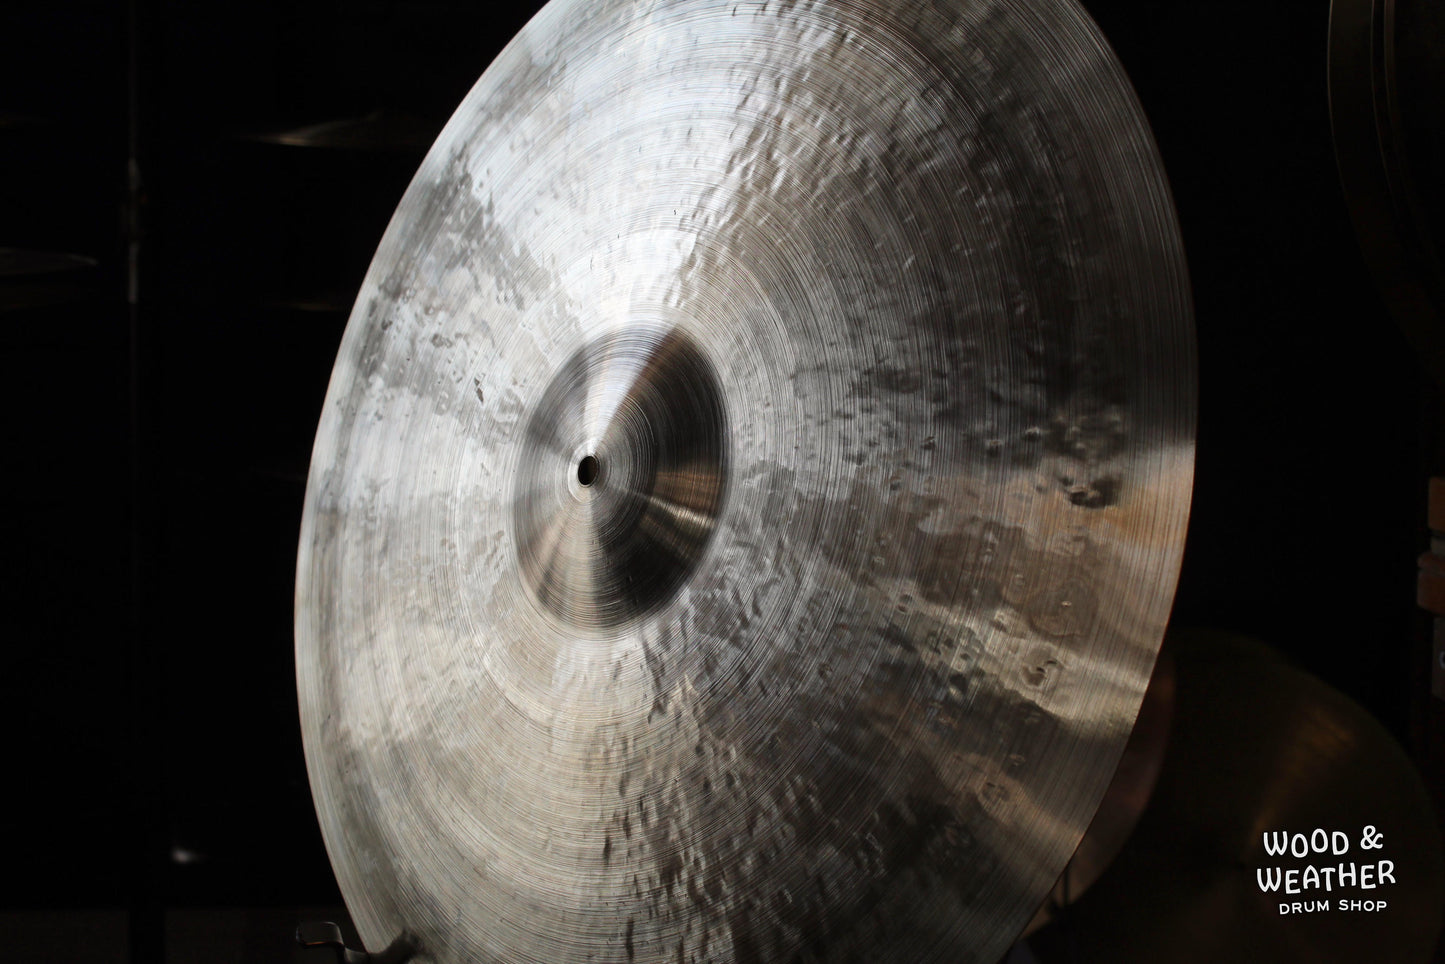 PGB Artisan Cymbals 22" Traditional Series Ride Cymbal 2380g